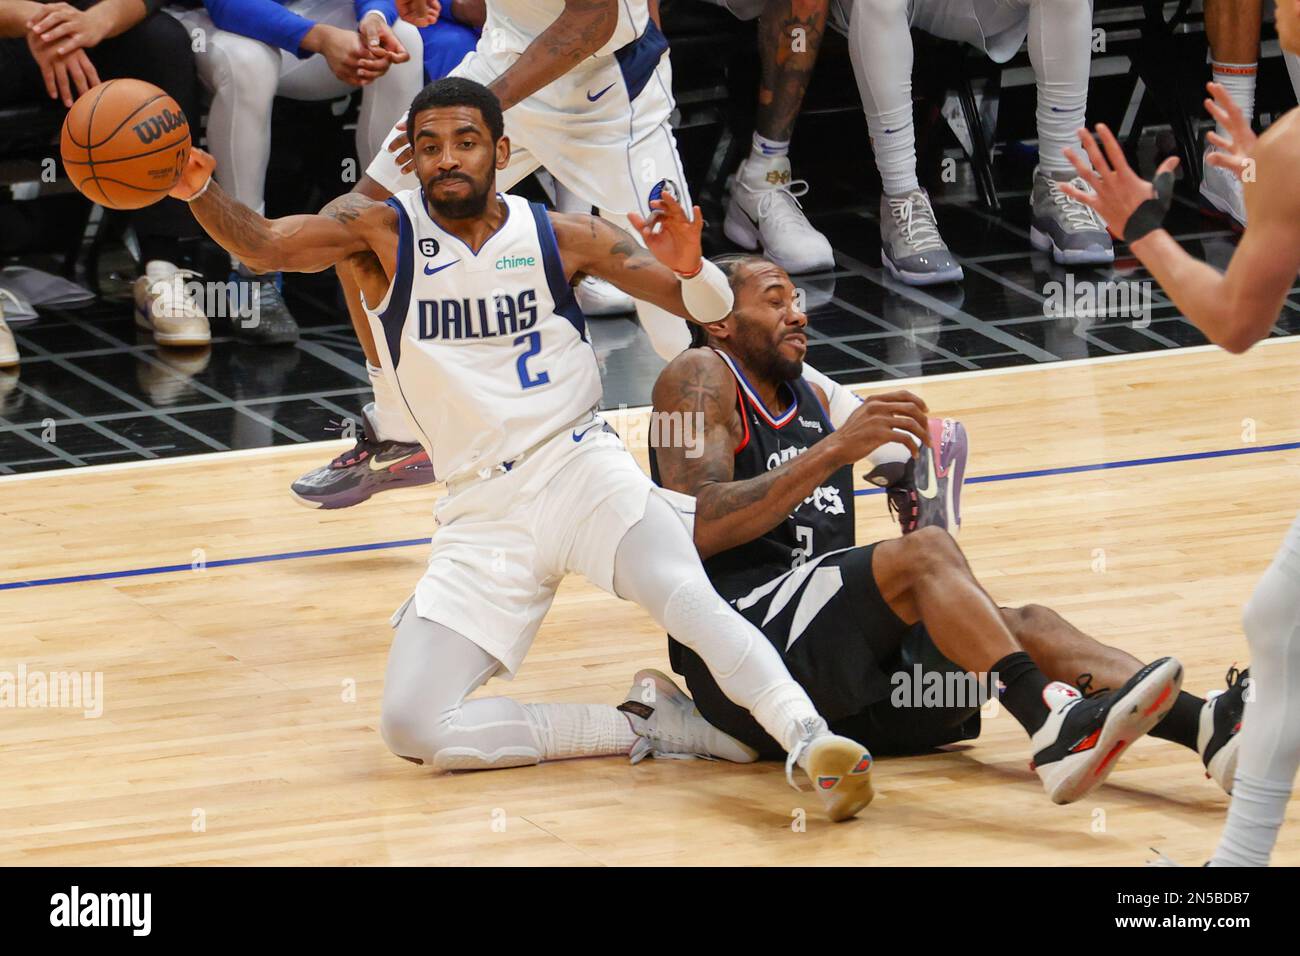 Los Angeles, United States. 08th Feb, 2023. Marcus Morris Sr. (L) of Los  Angeles Clippers and Kyrie Irving (R) of Mavericks Dallas in action during  the NBA basketball game between Clippers and